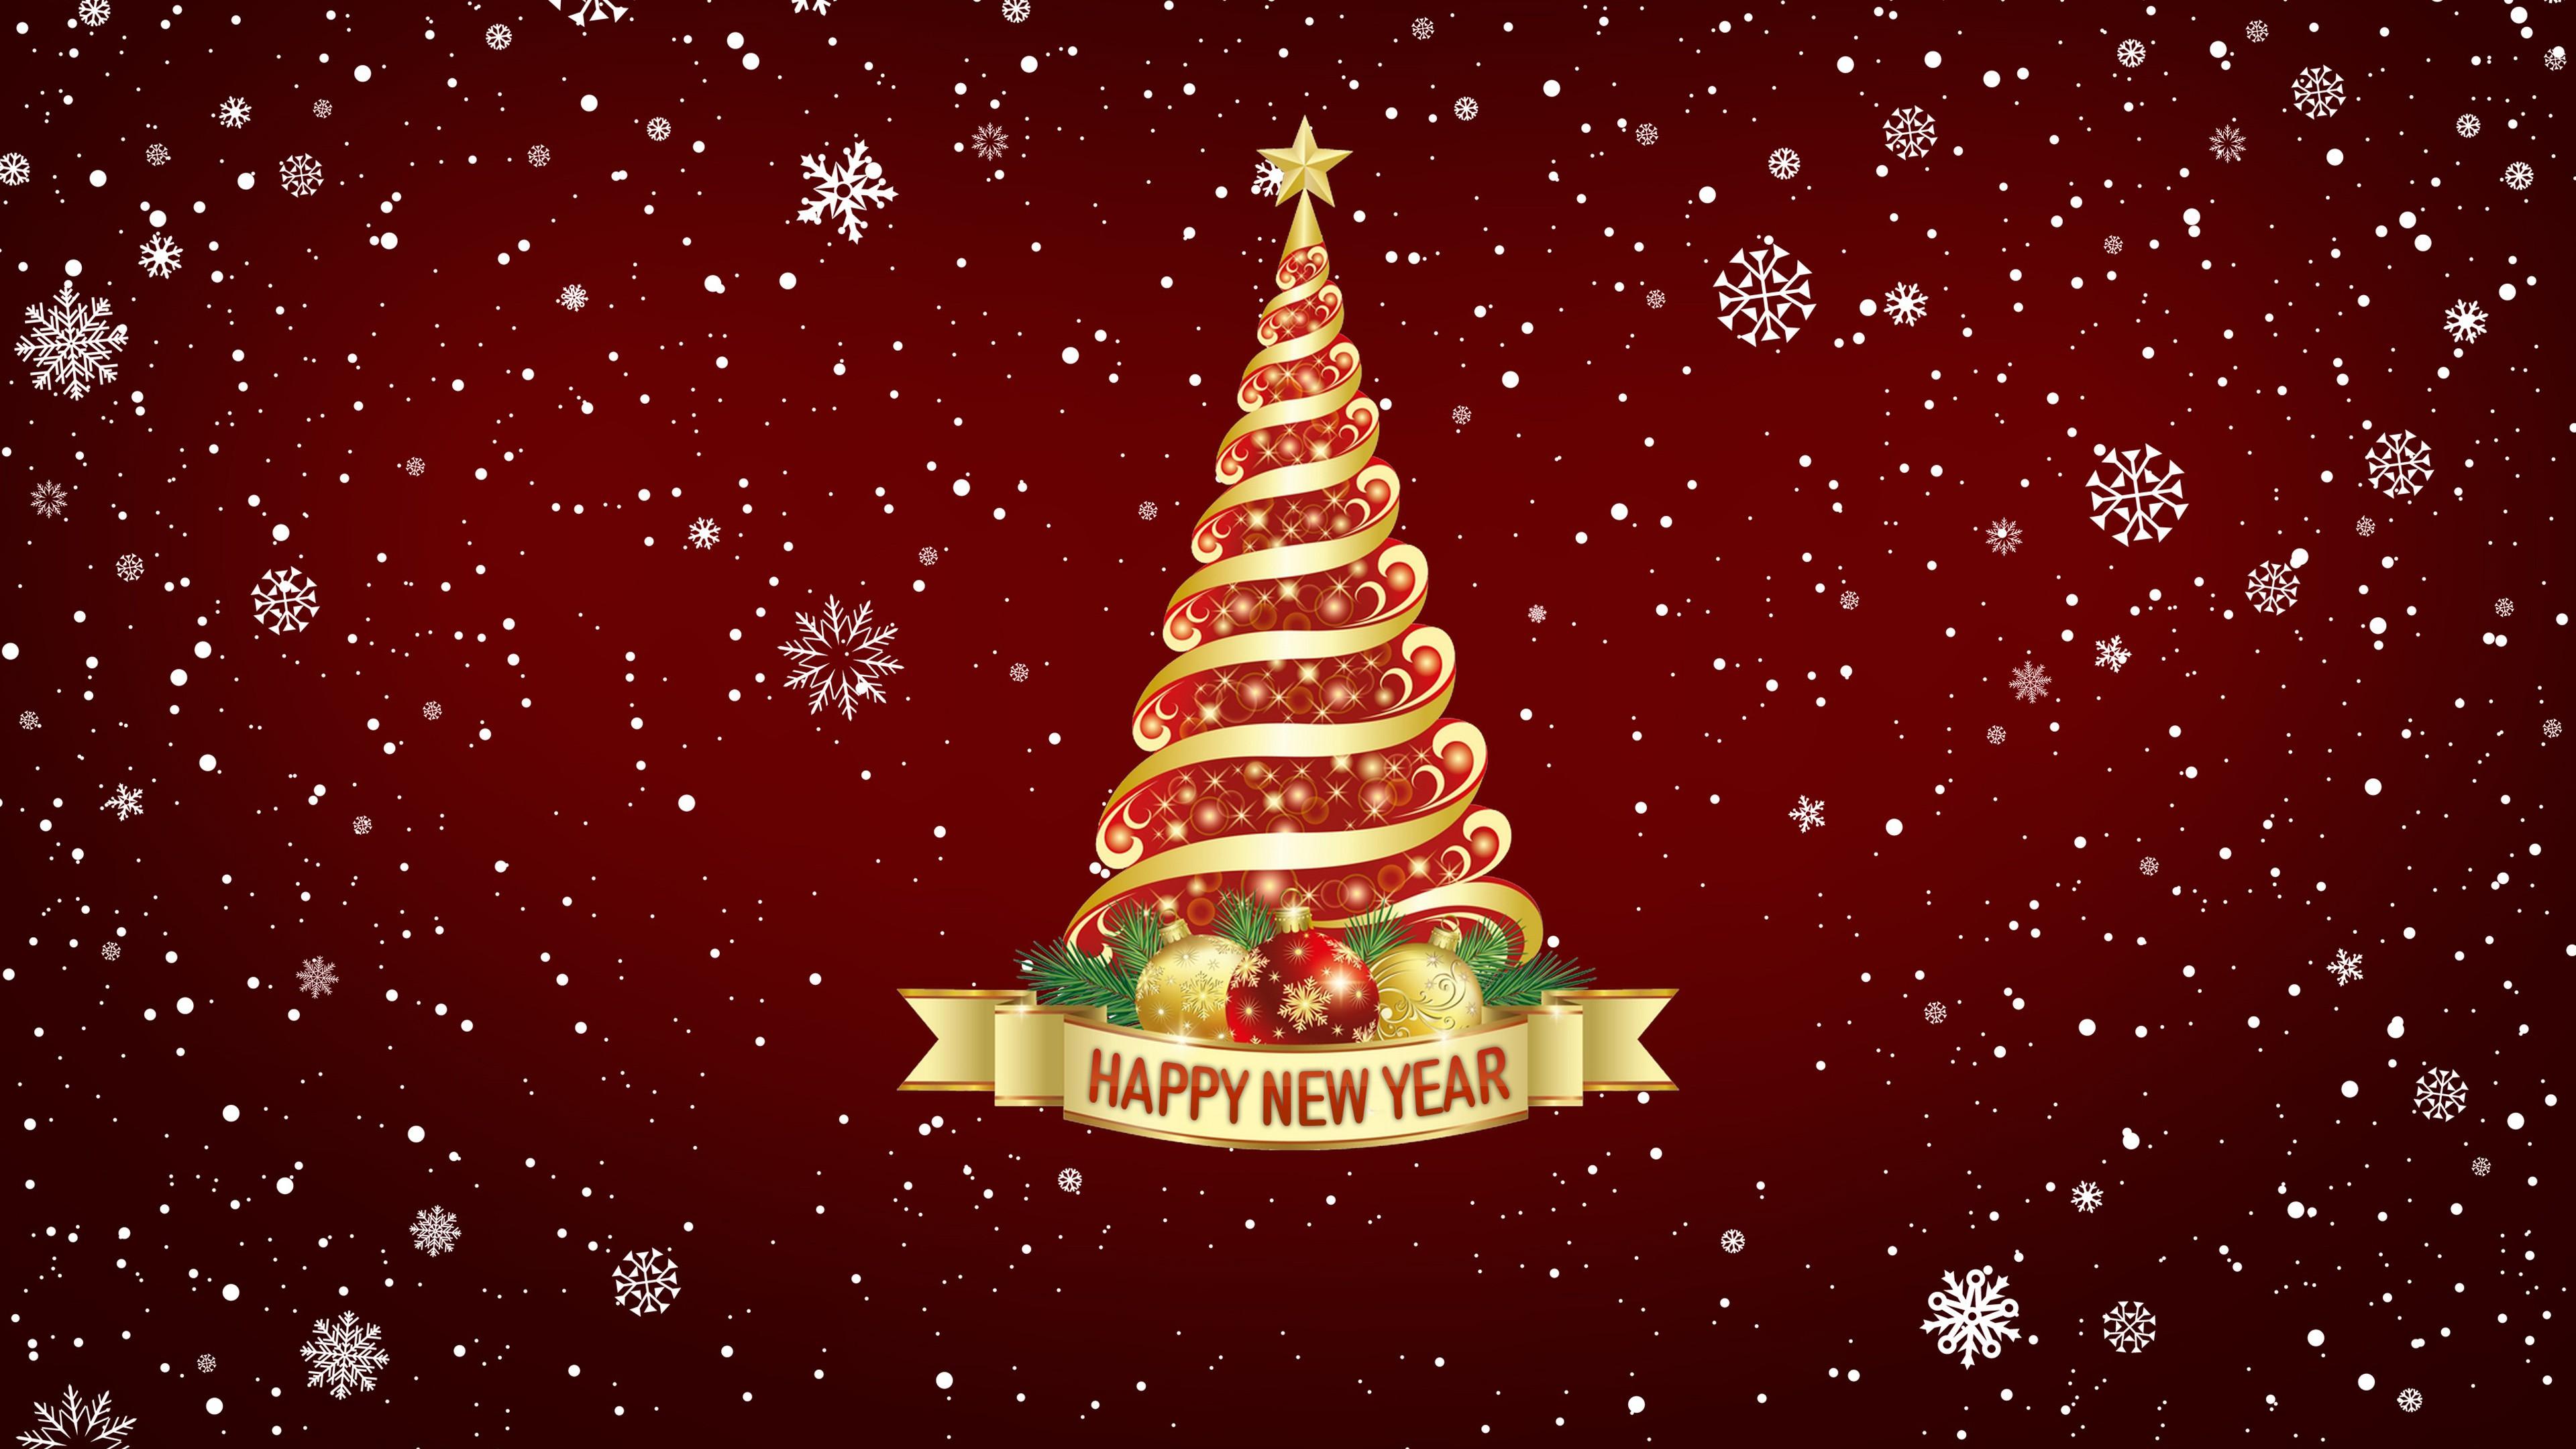 Happy New Year Christmas Tree Snowflake Backgrounds 4K.